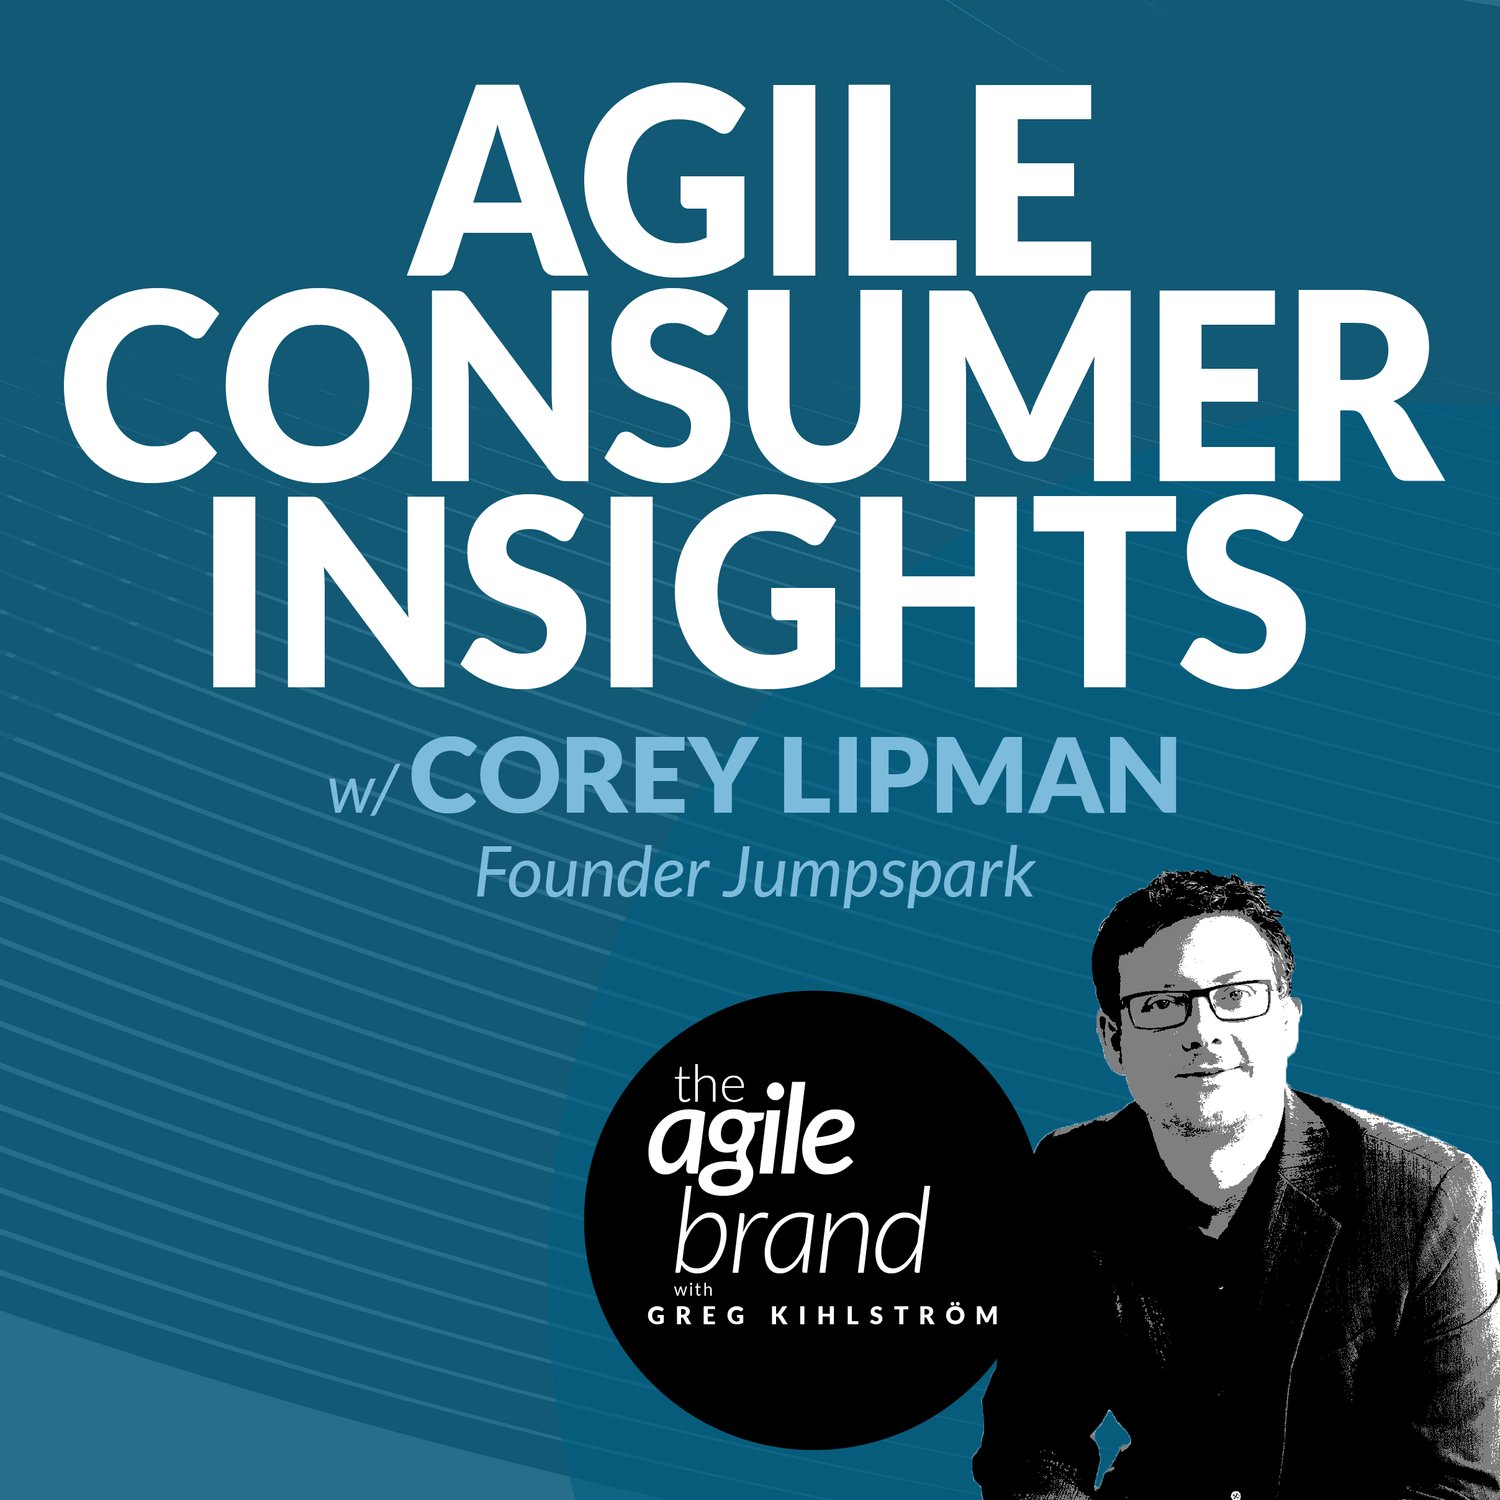 S5  343: Agile Consumer Insights with Corey Lipman, Jumpspark Pending